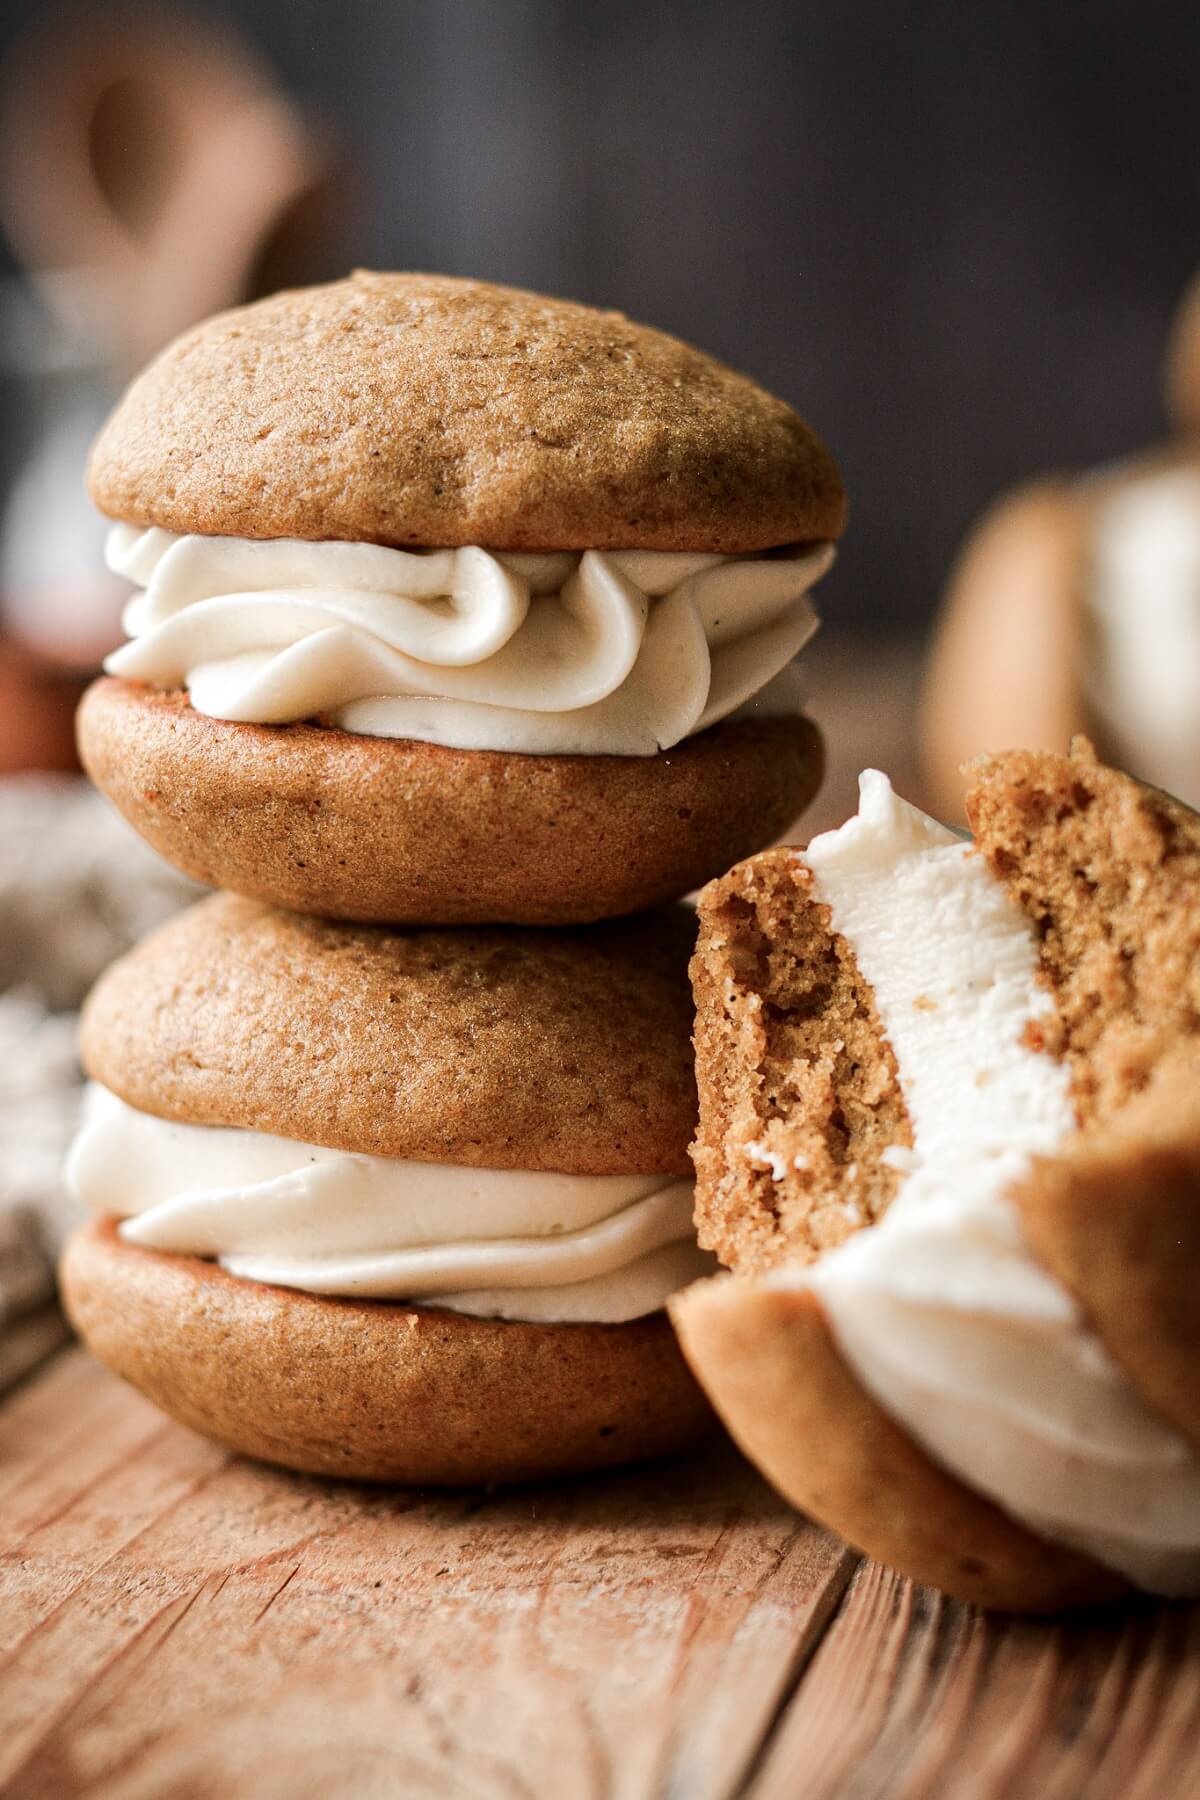 Pumpkin whoopie pies with cream cheese filling, one with a bite taken.